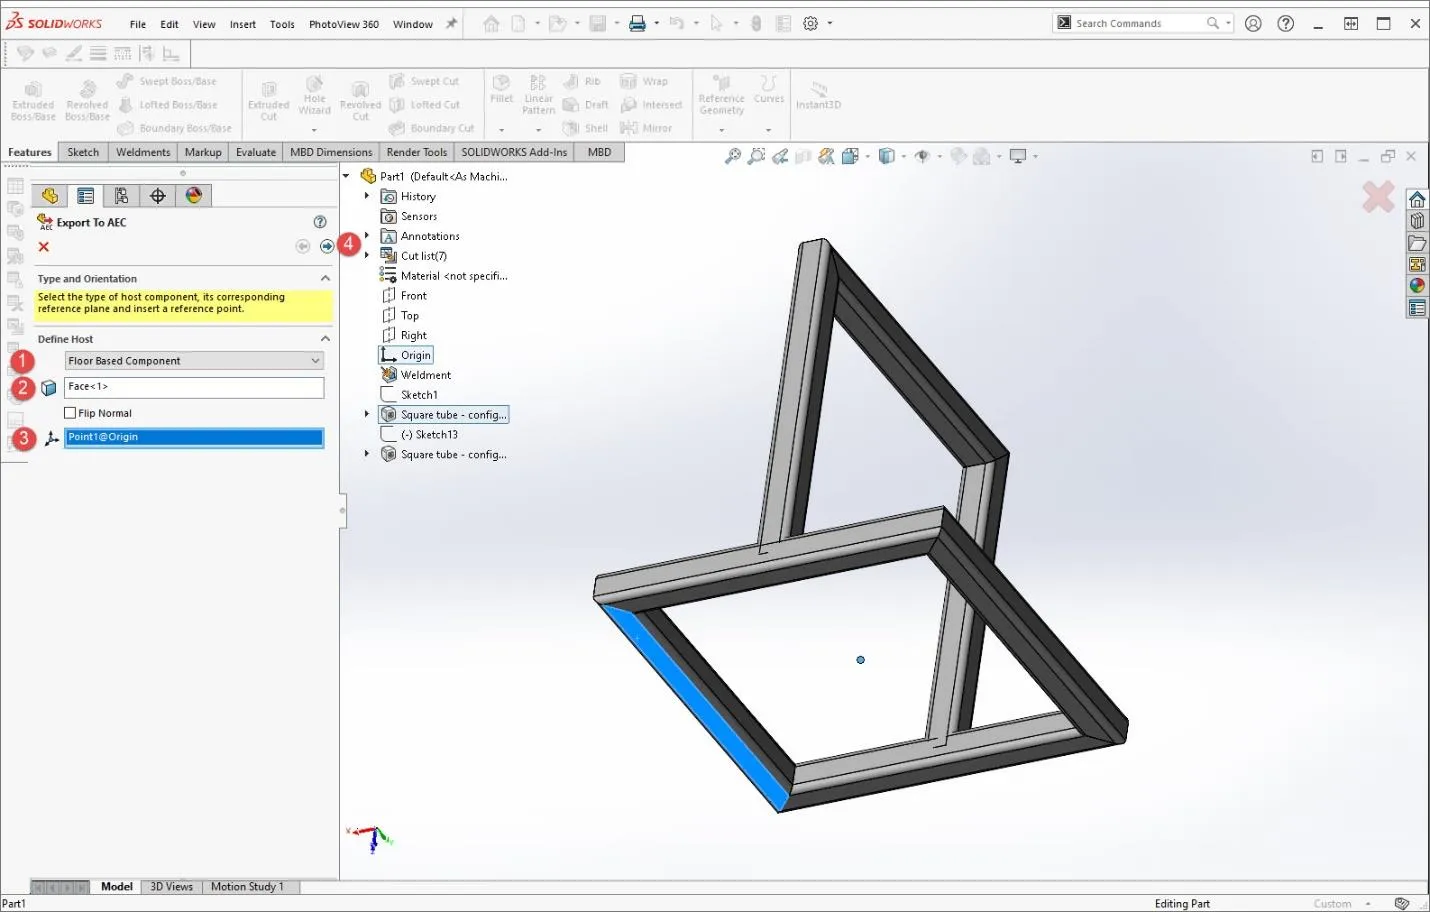 Exporting SOLIDWORKS Model to BIM Software